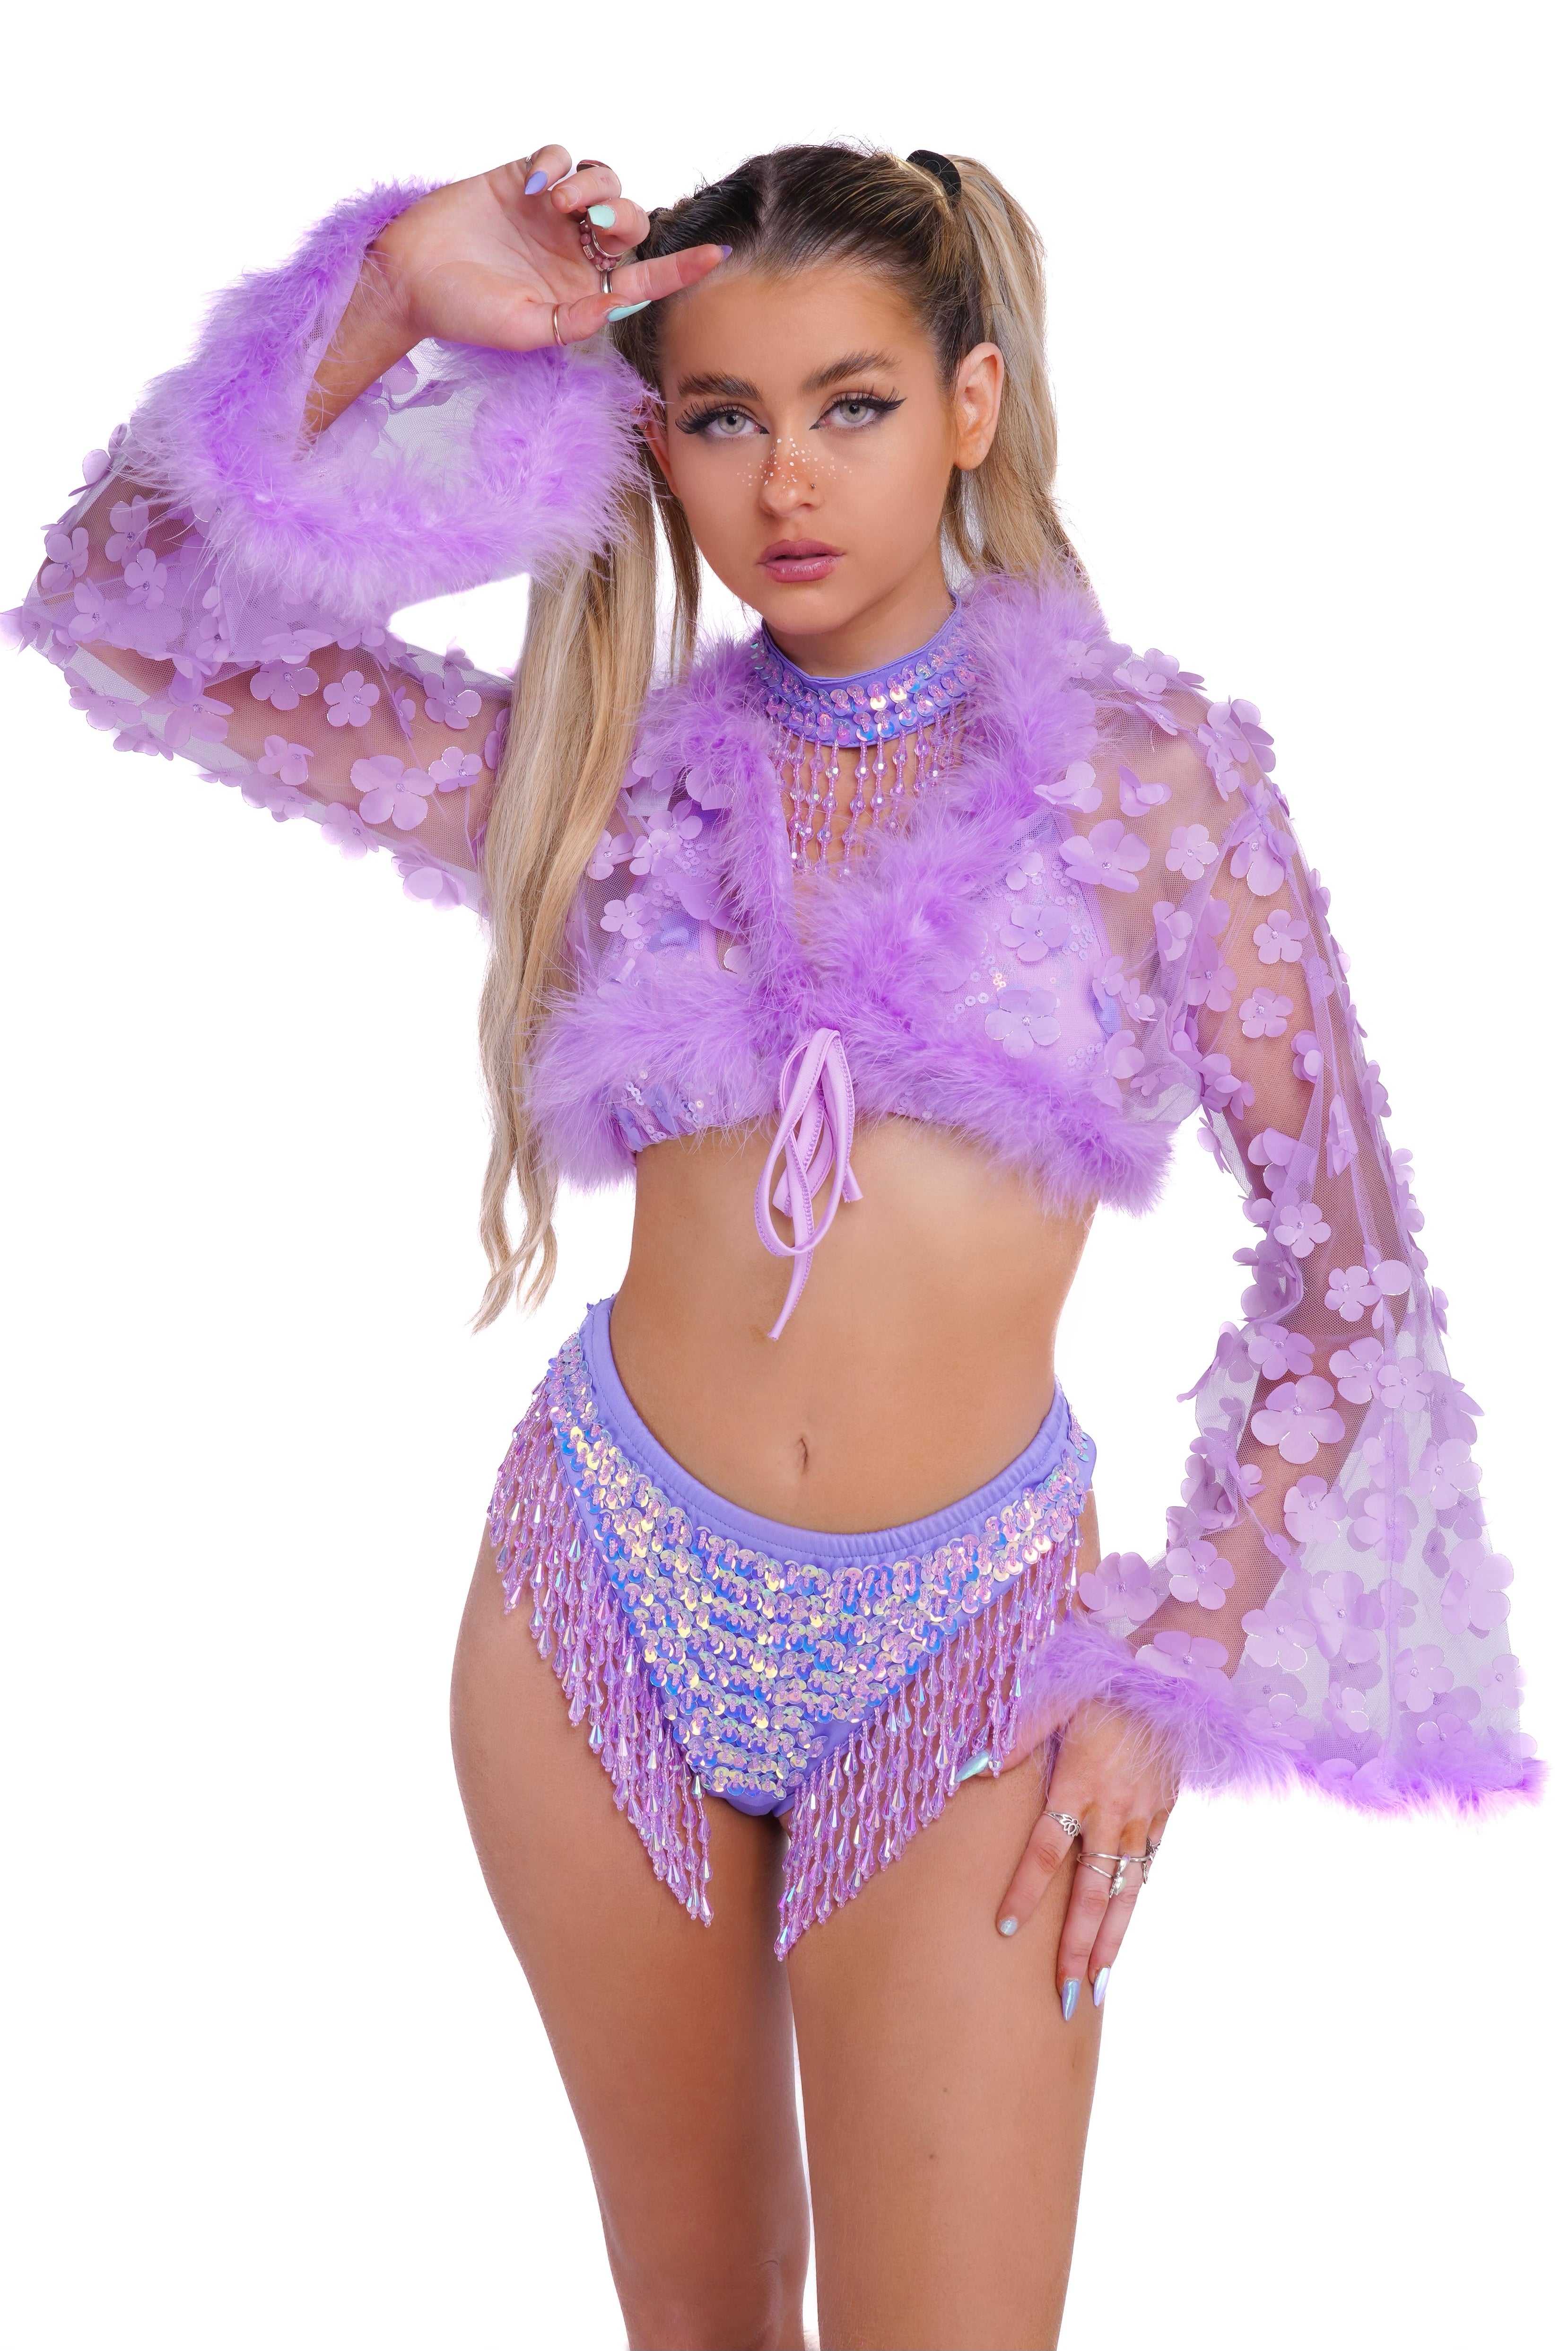 FULL OUTFIT- Lavender Fuzzy